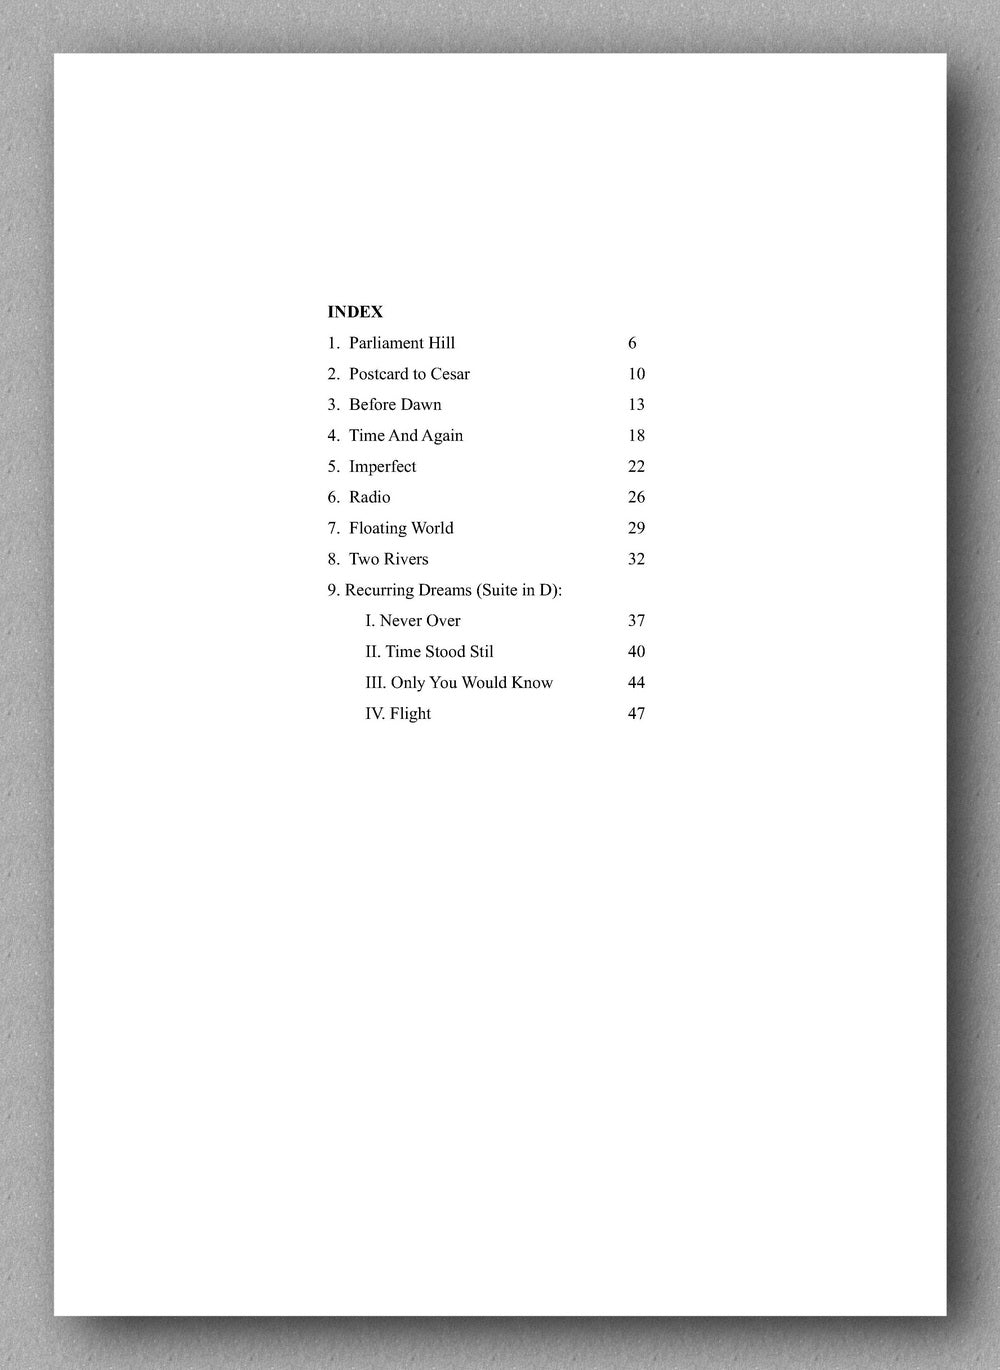 Andrew Williams, Complete Works for Solo Classical Guitar, Volume 4 - preview of the Index